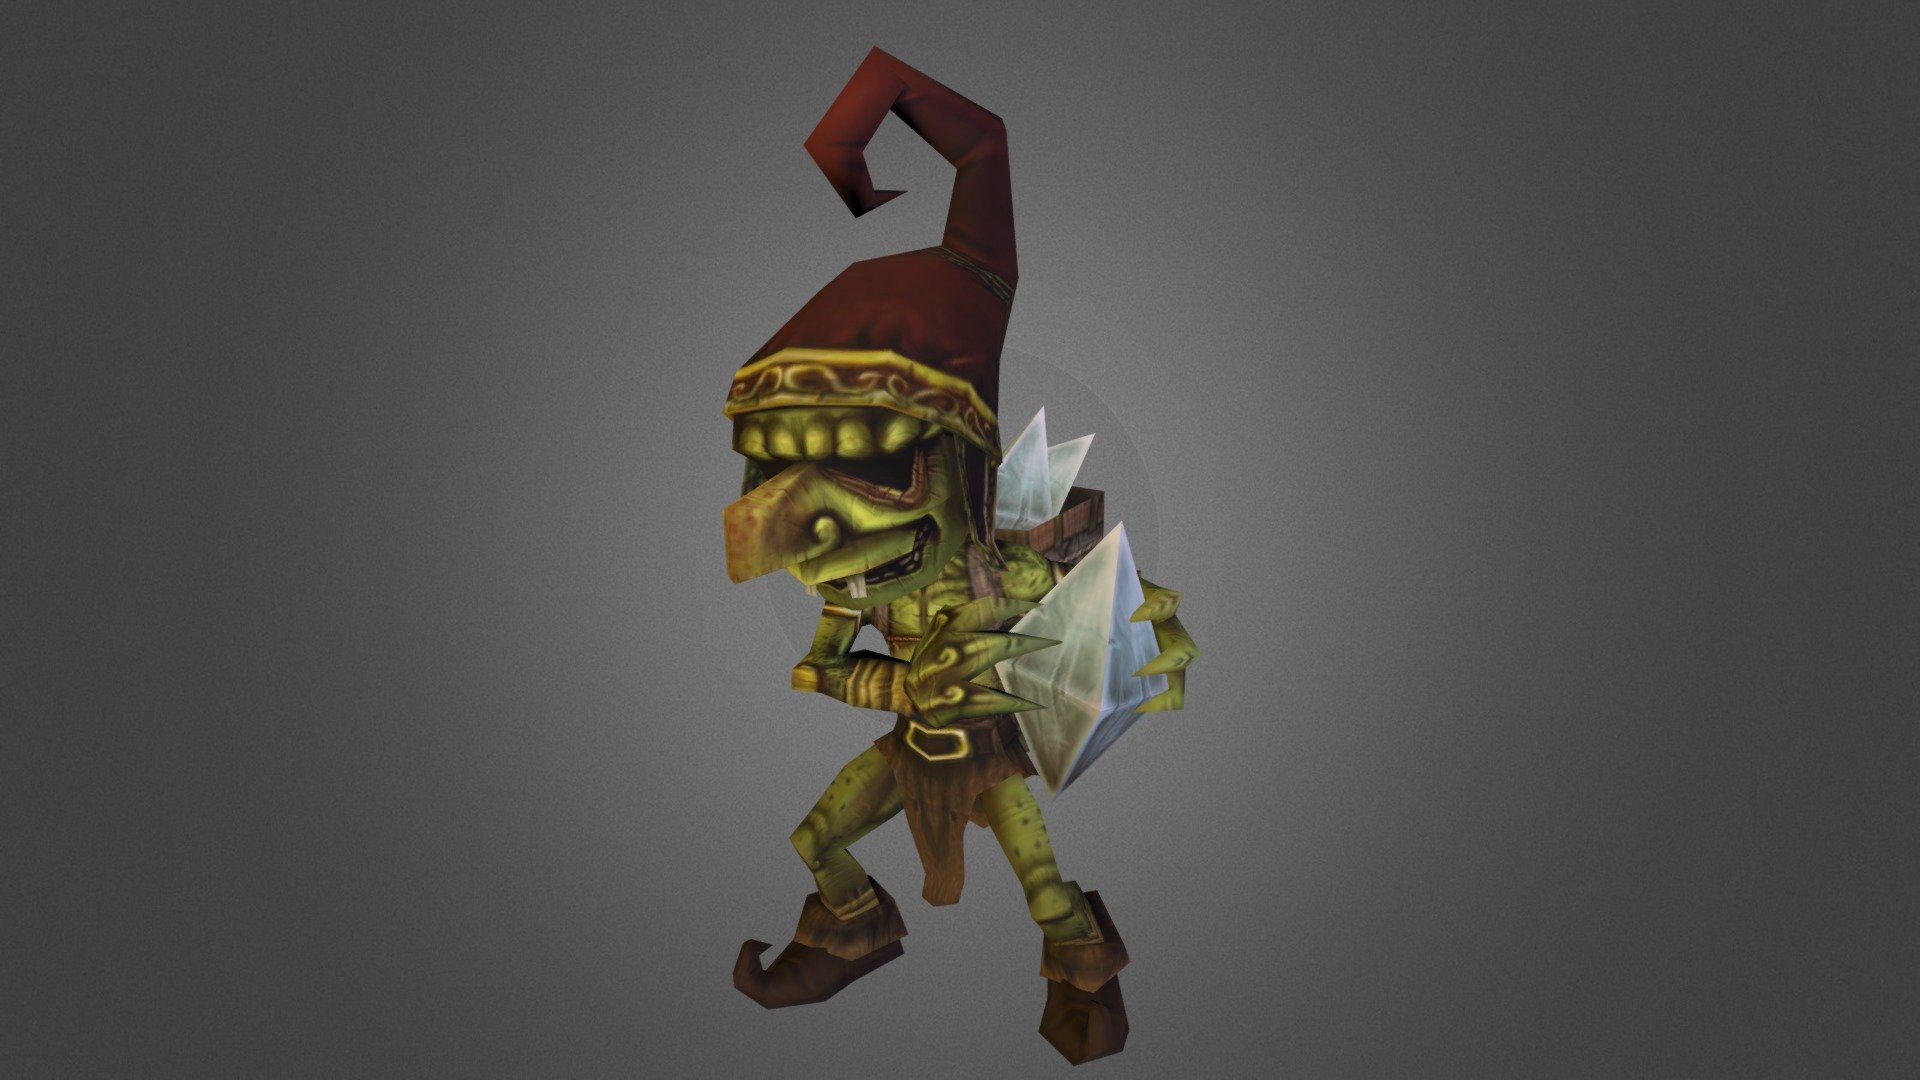 860 Tris
512x512 diffuse handpainted - Gnome - 3D model by vicentemolina 3d model